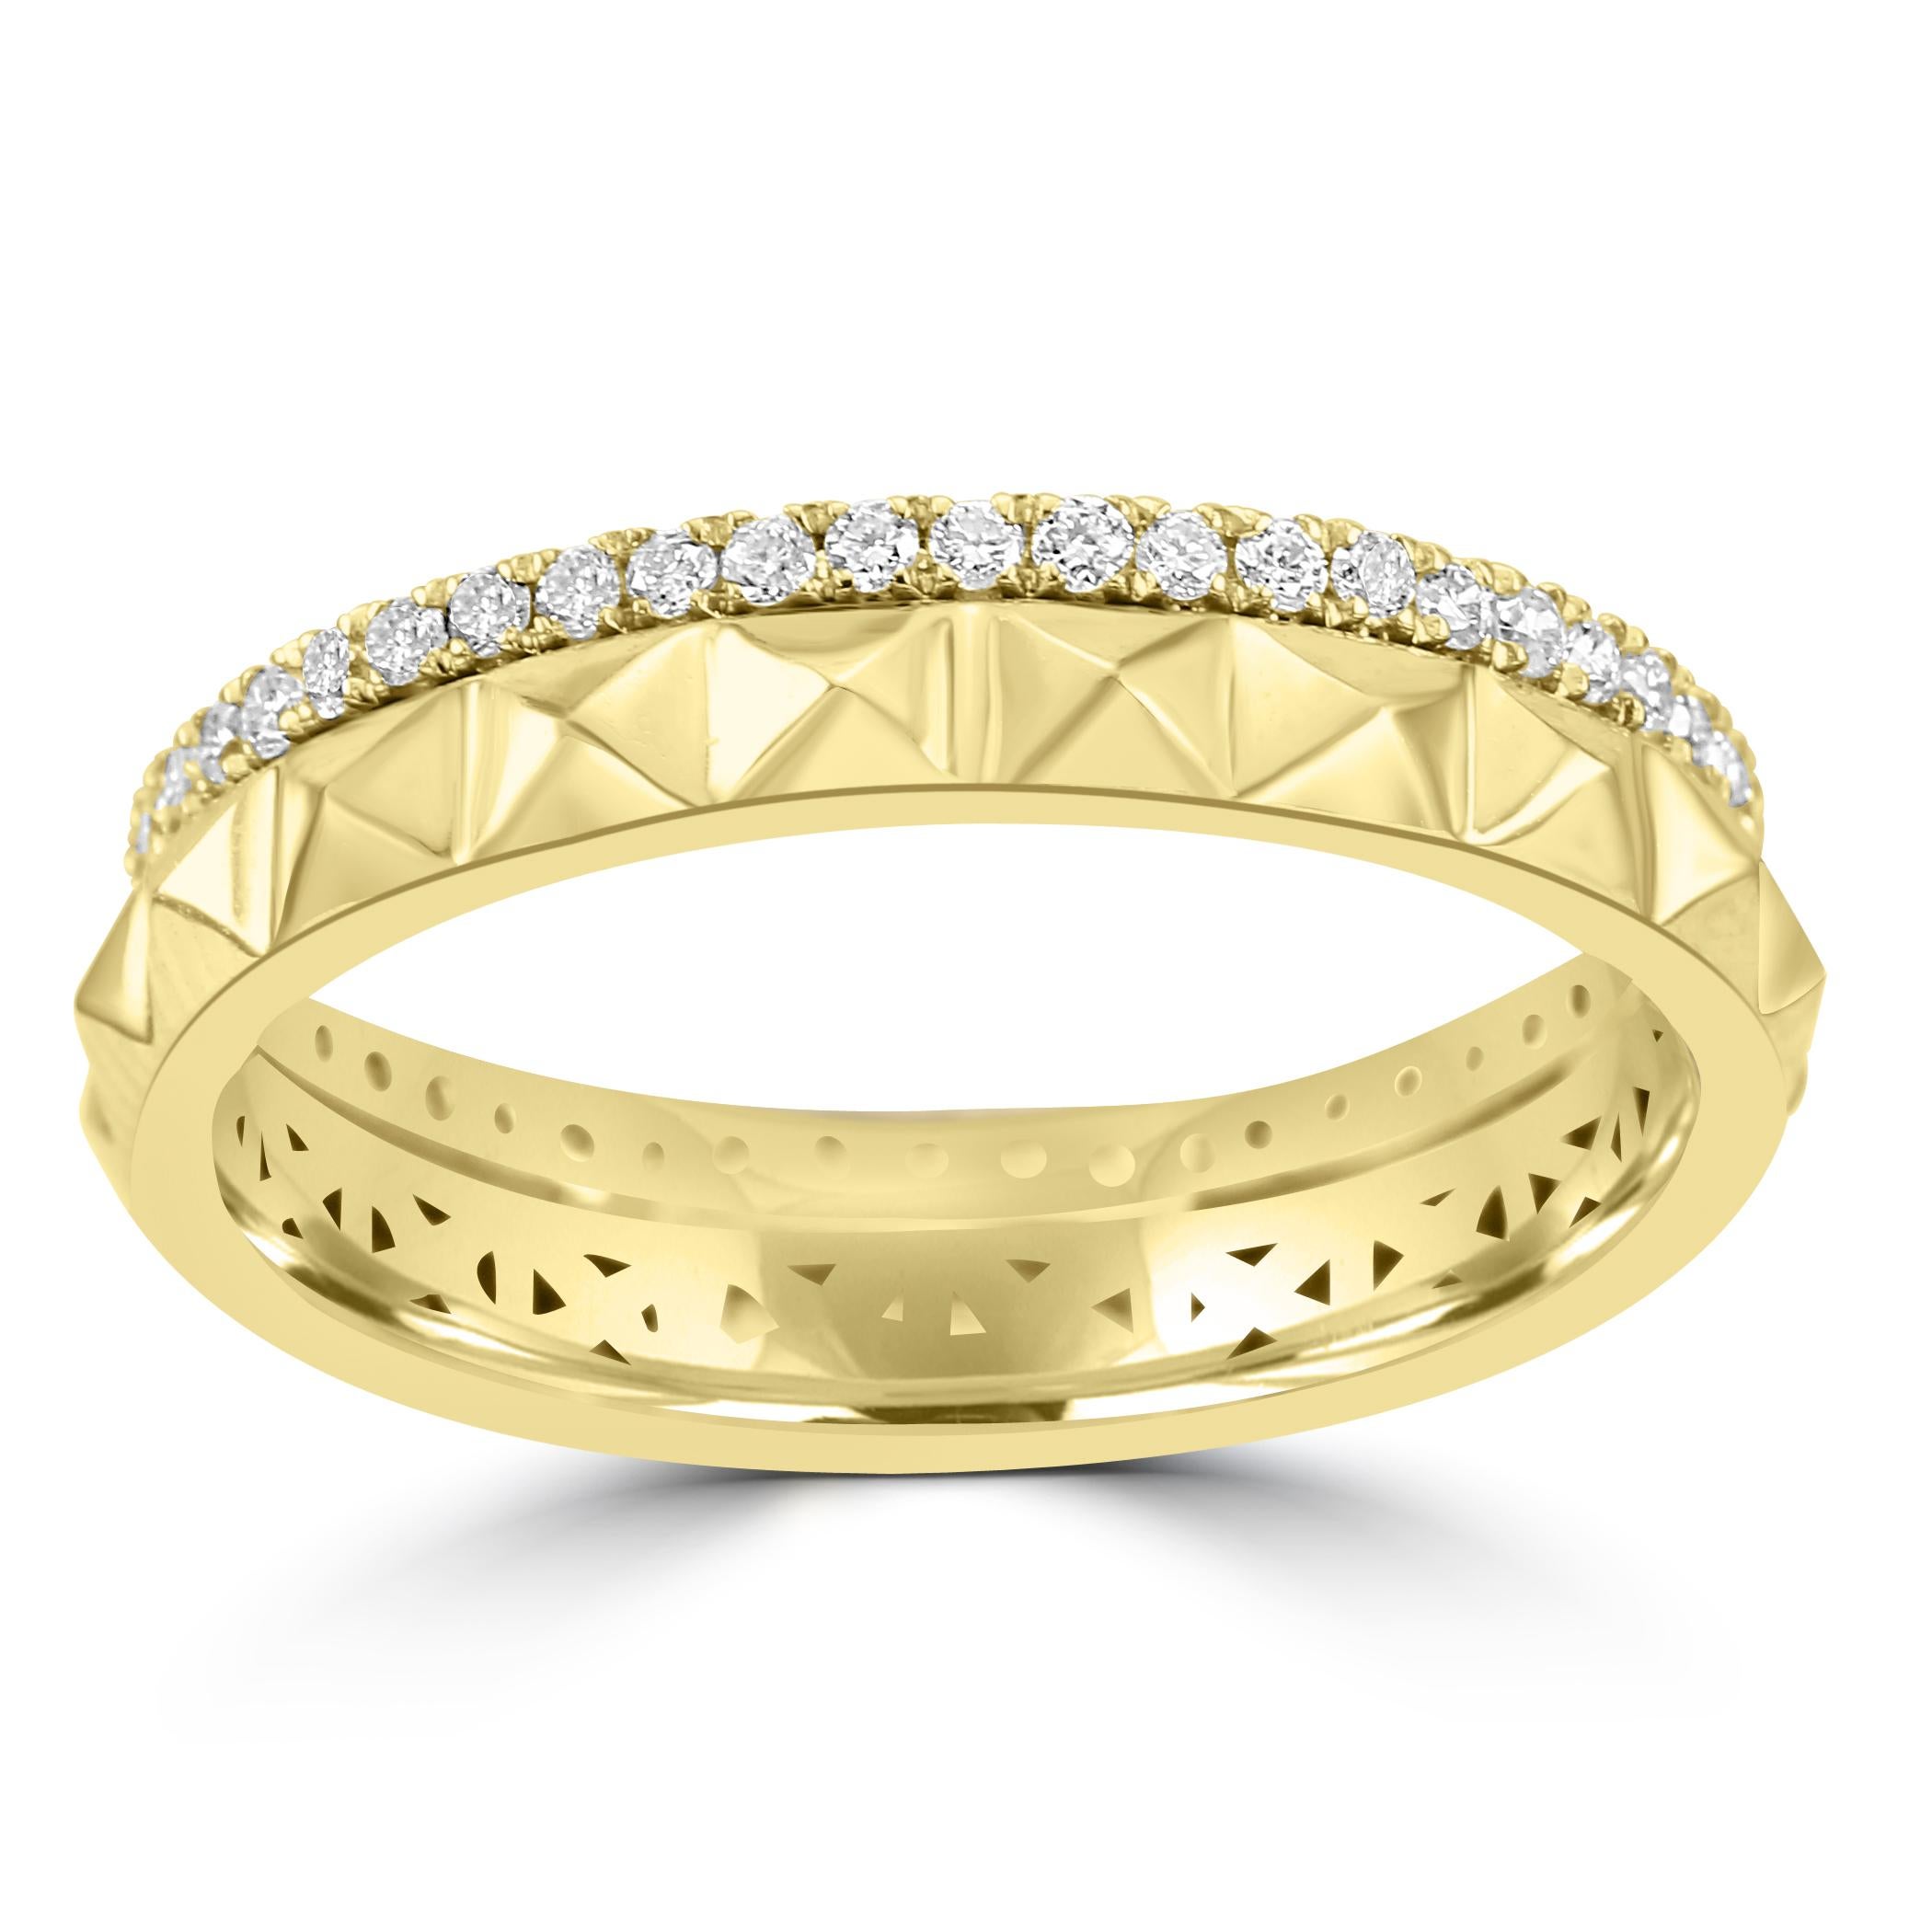 Indulge in the timeless allure of our 14K Yellow Gold Fashion Eternity Ring, a symbol of enduring elegance and sophistication.

The diamonds in this eternity ring are meticulously arranged to create a seamless and unbroken circle, symbolizing